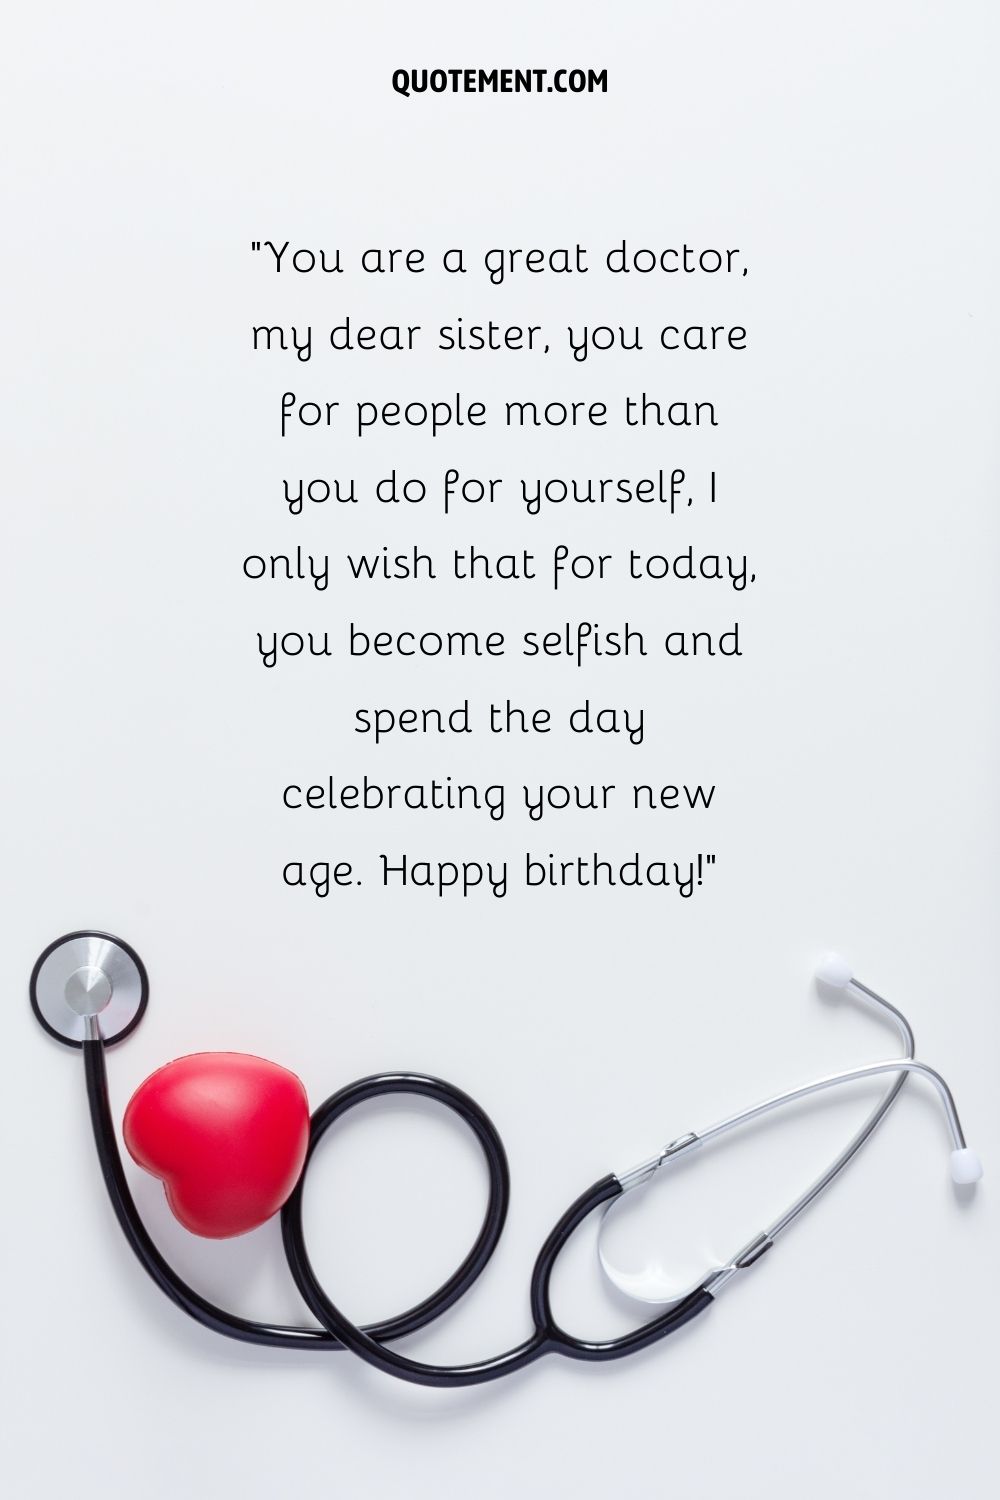 great doctor image represented by happy birthday doctor sister wish